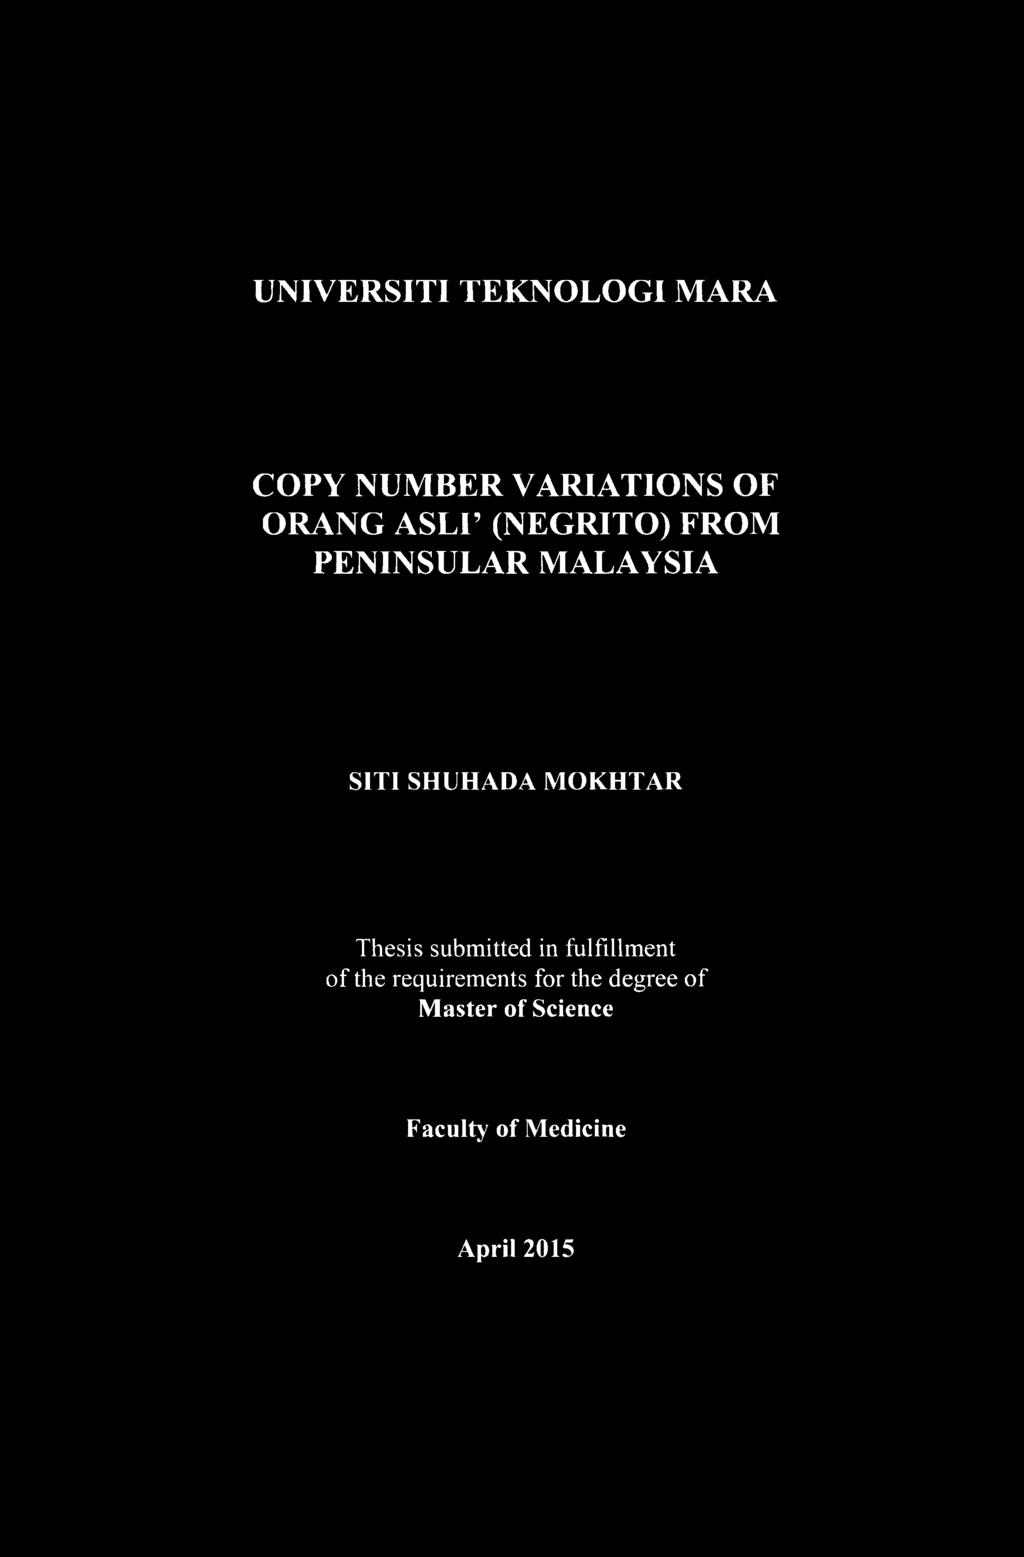 MOKHTAR Thesis submitted in fulfillment of the requirements